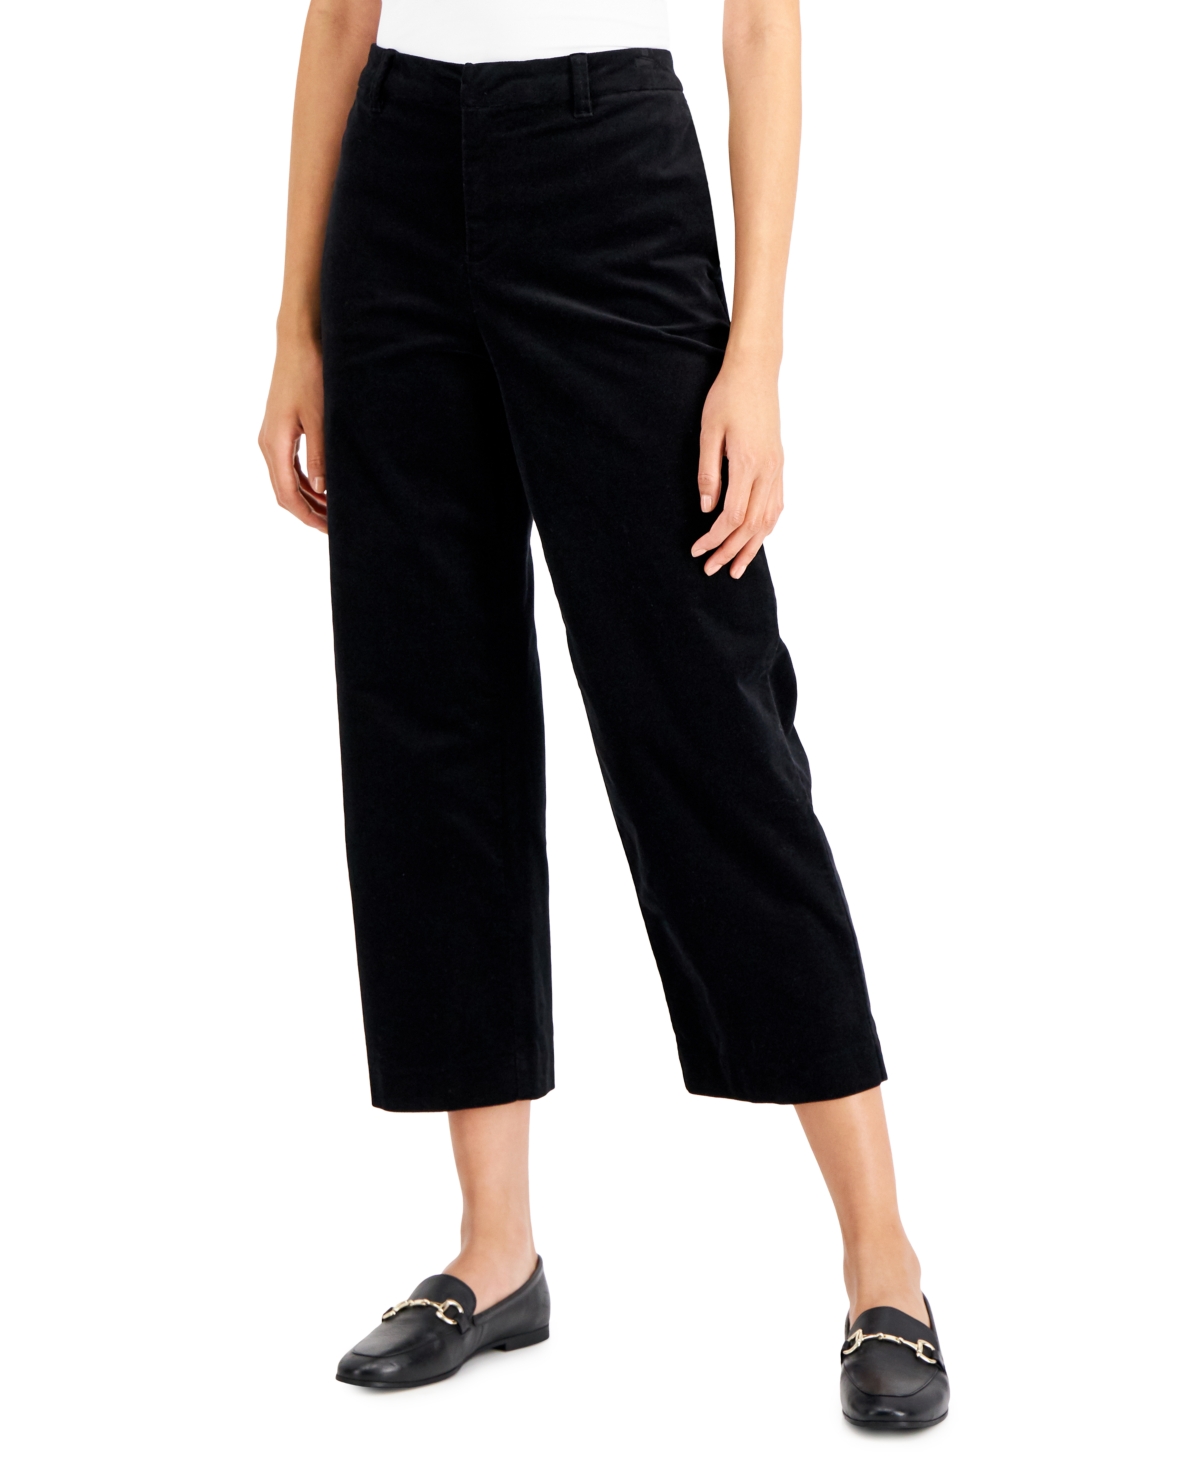  Charter Club Velveteen Ankle Pants, Created for Macy's